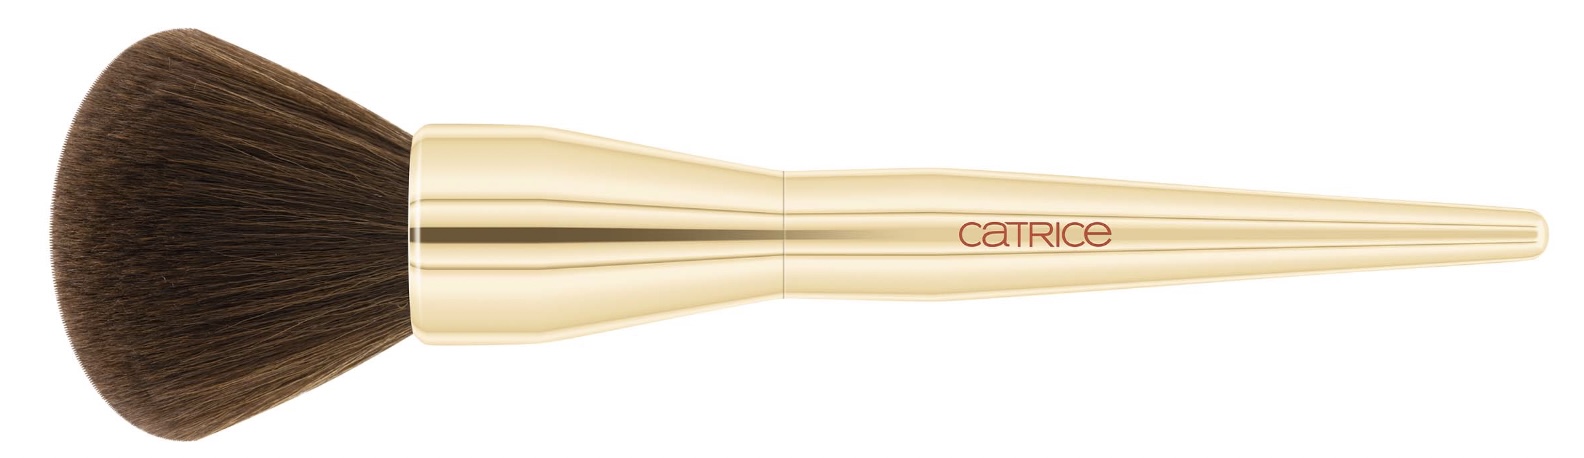 Catrice Fall in Colors Pennello viso